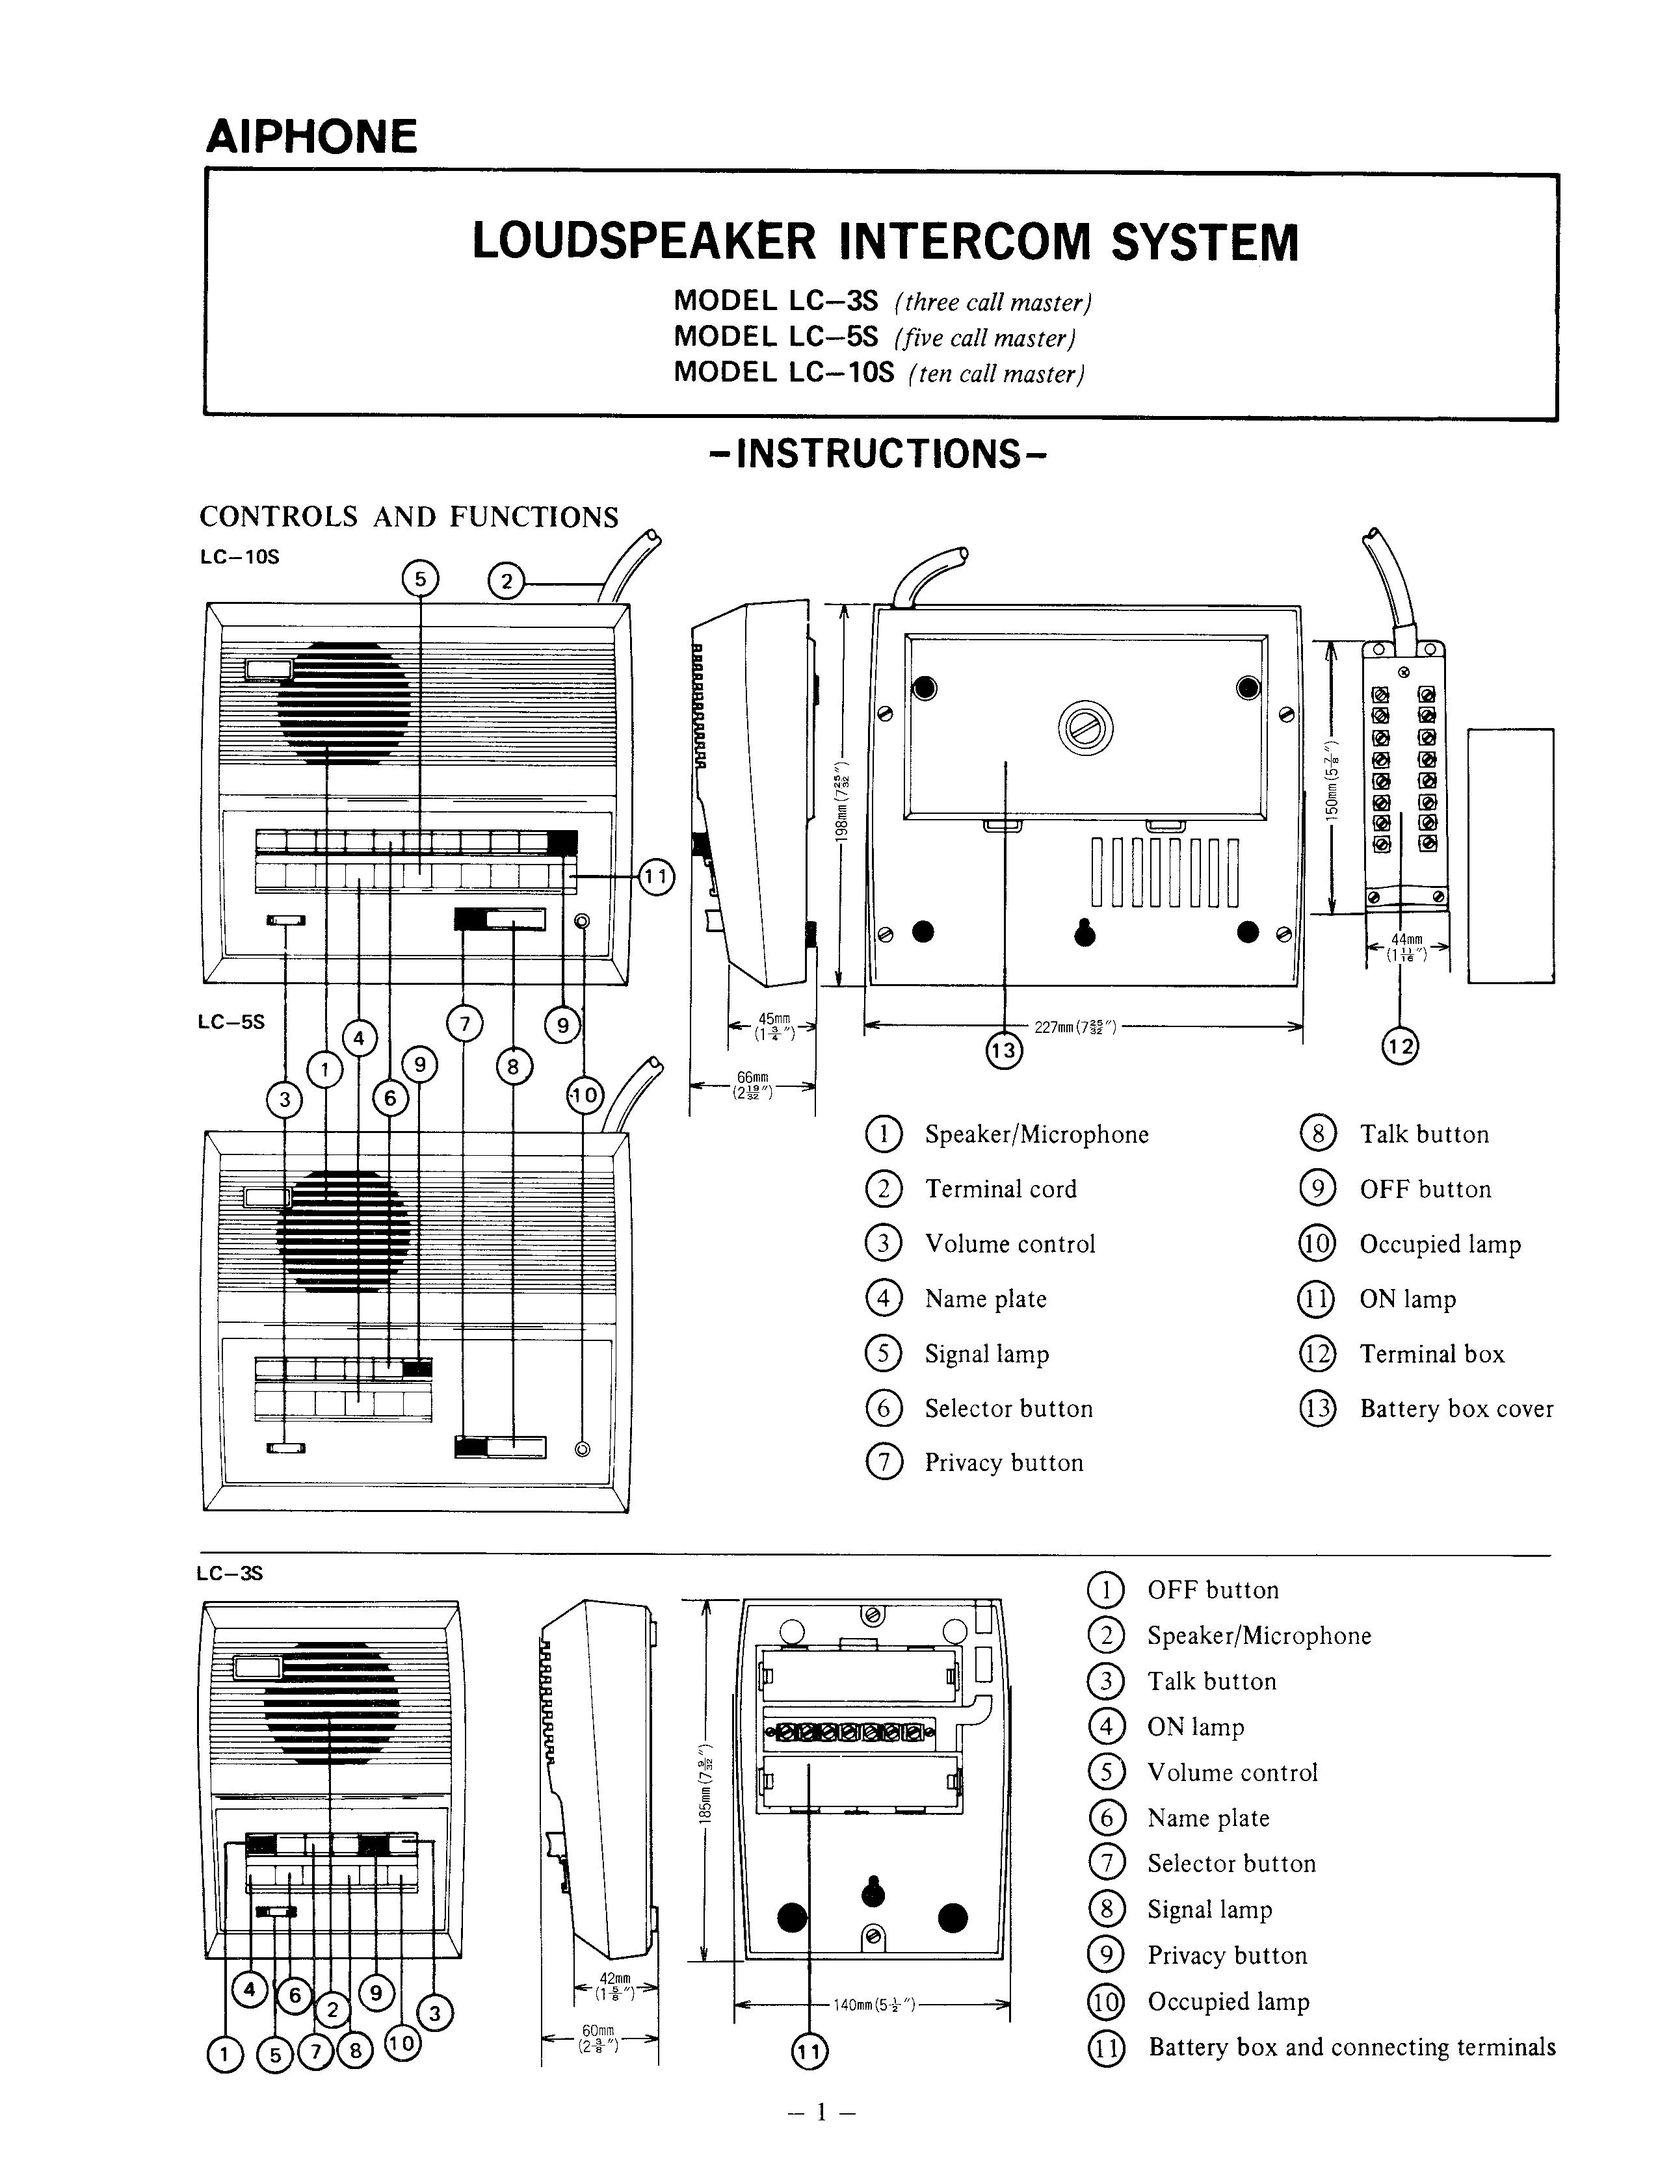 Aiphone Model LC-3S Speaker System User Manual